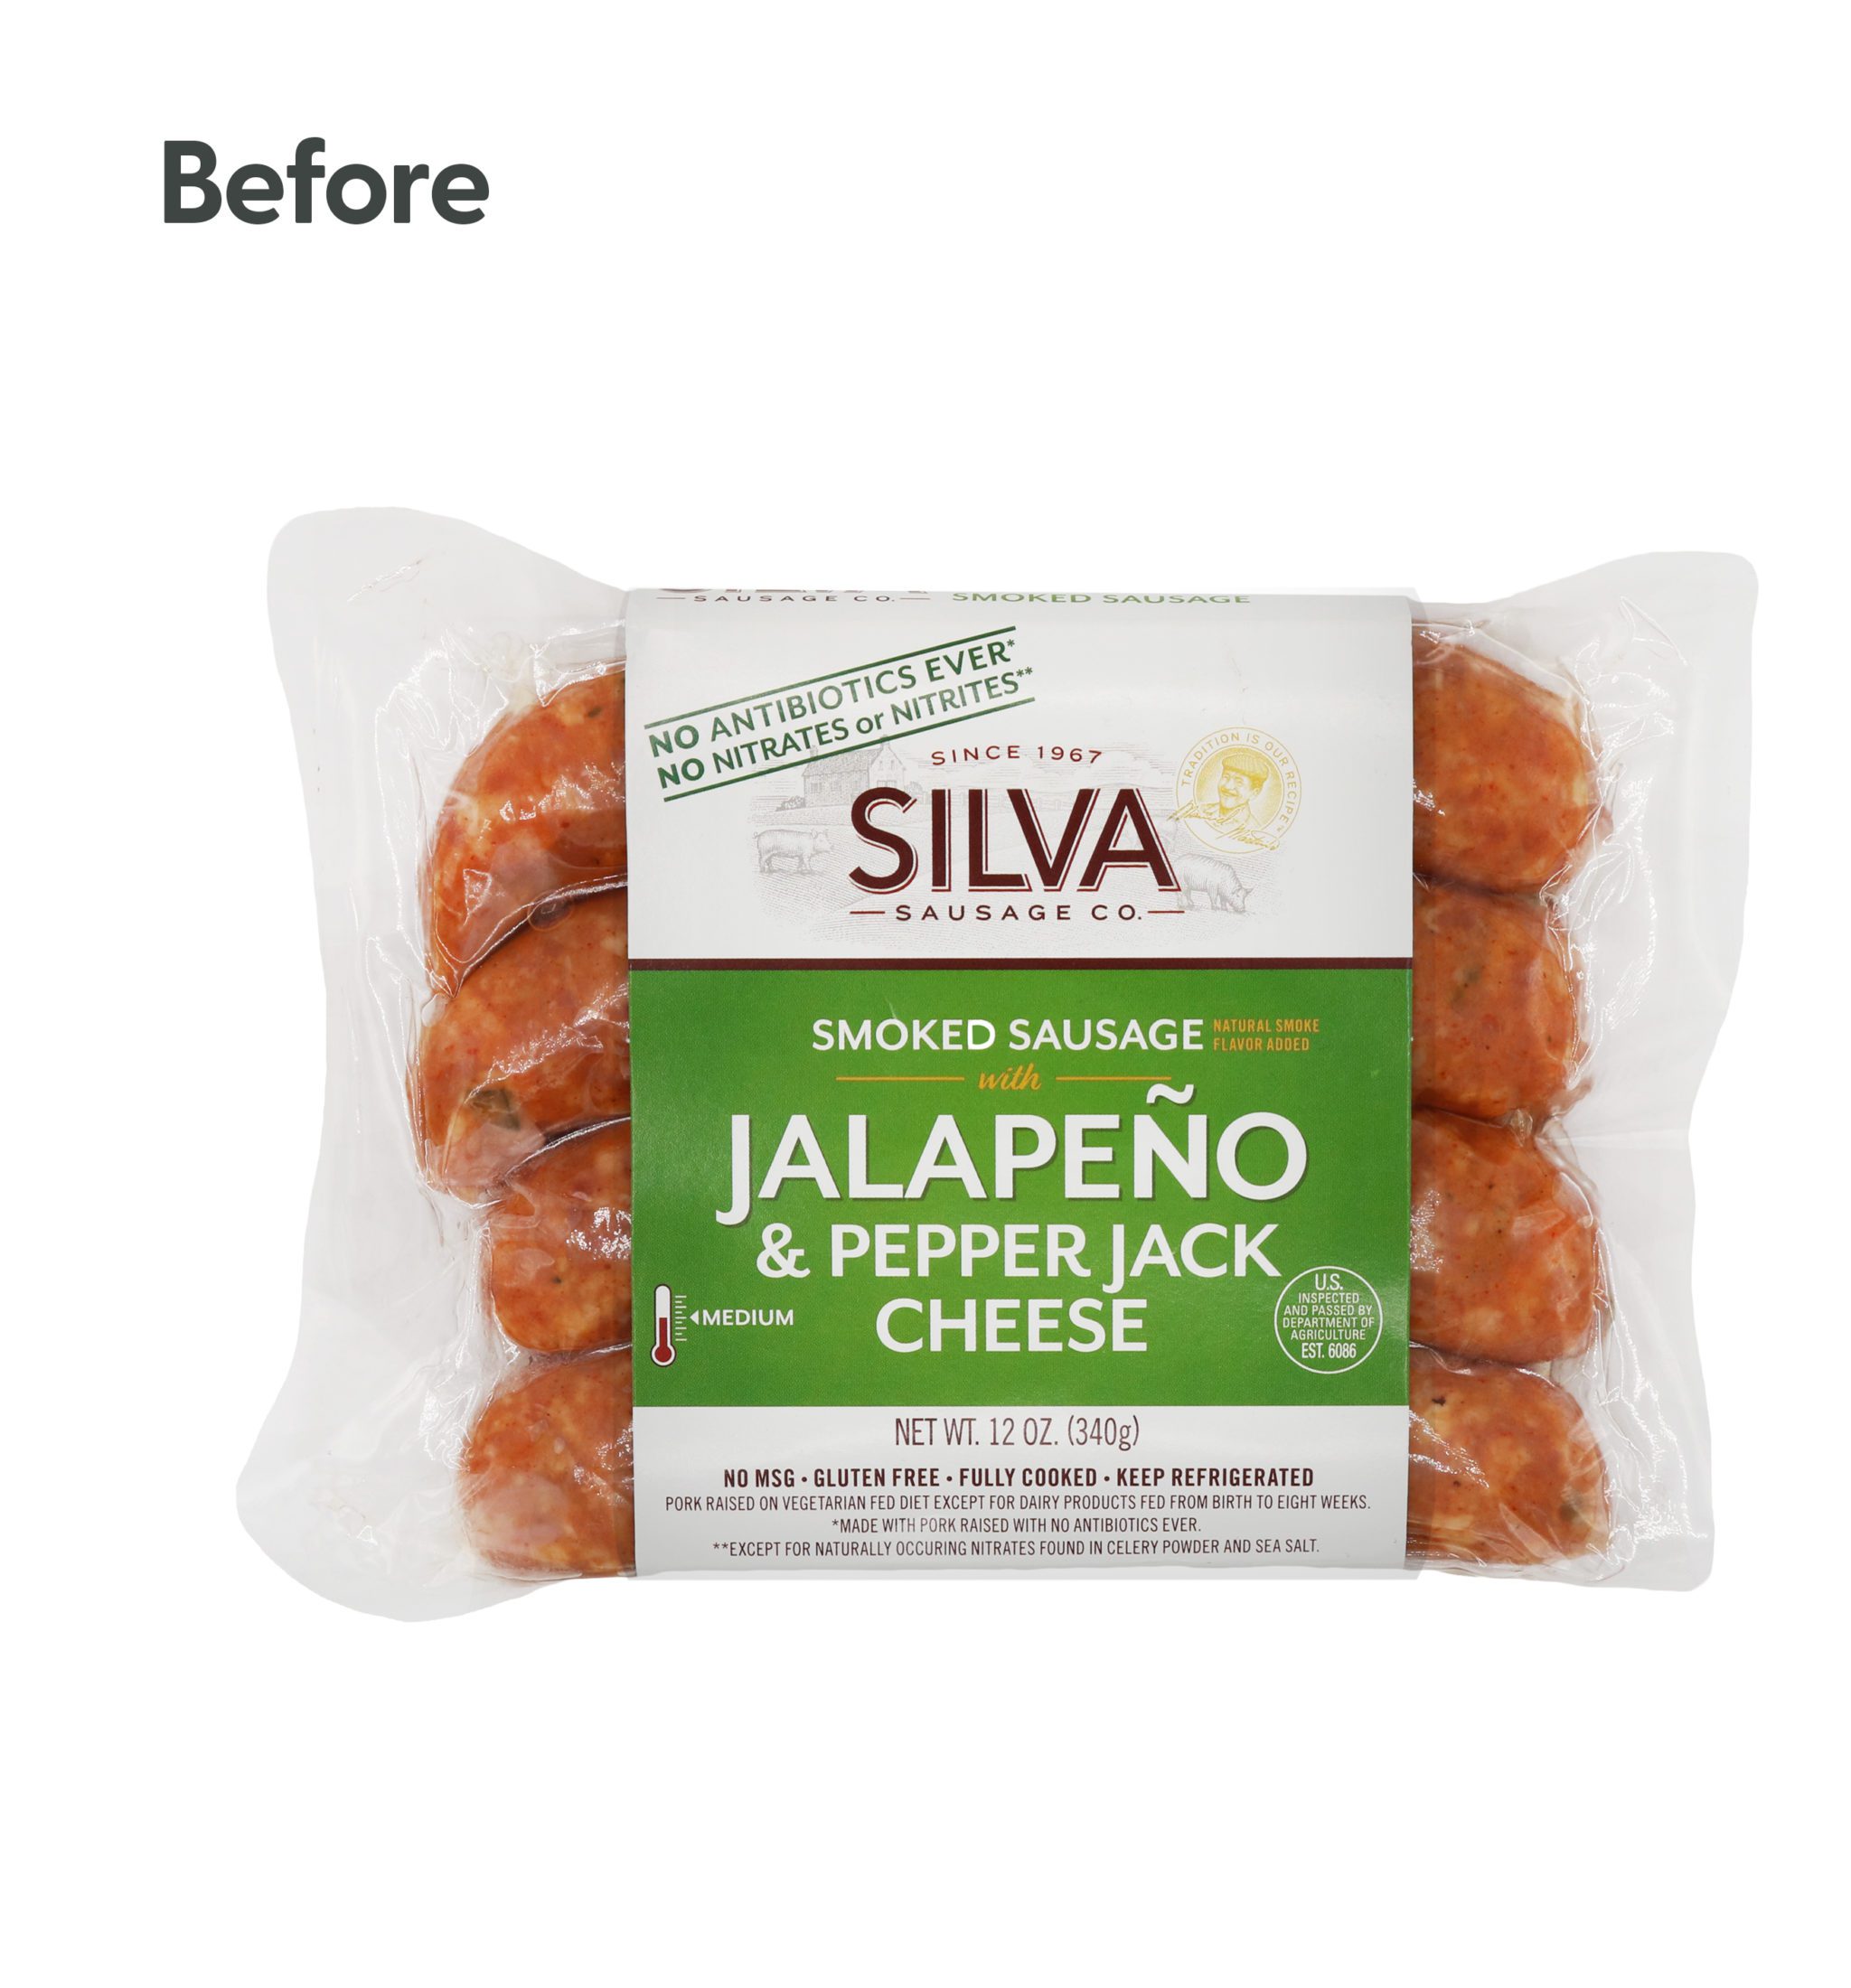 Packaging Re-Design for Silva Sausage! - The Creative Pack